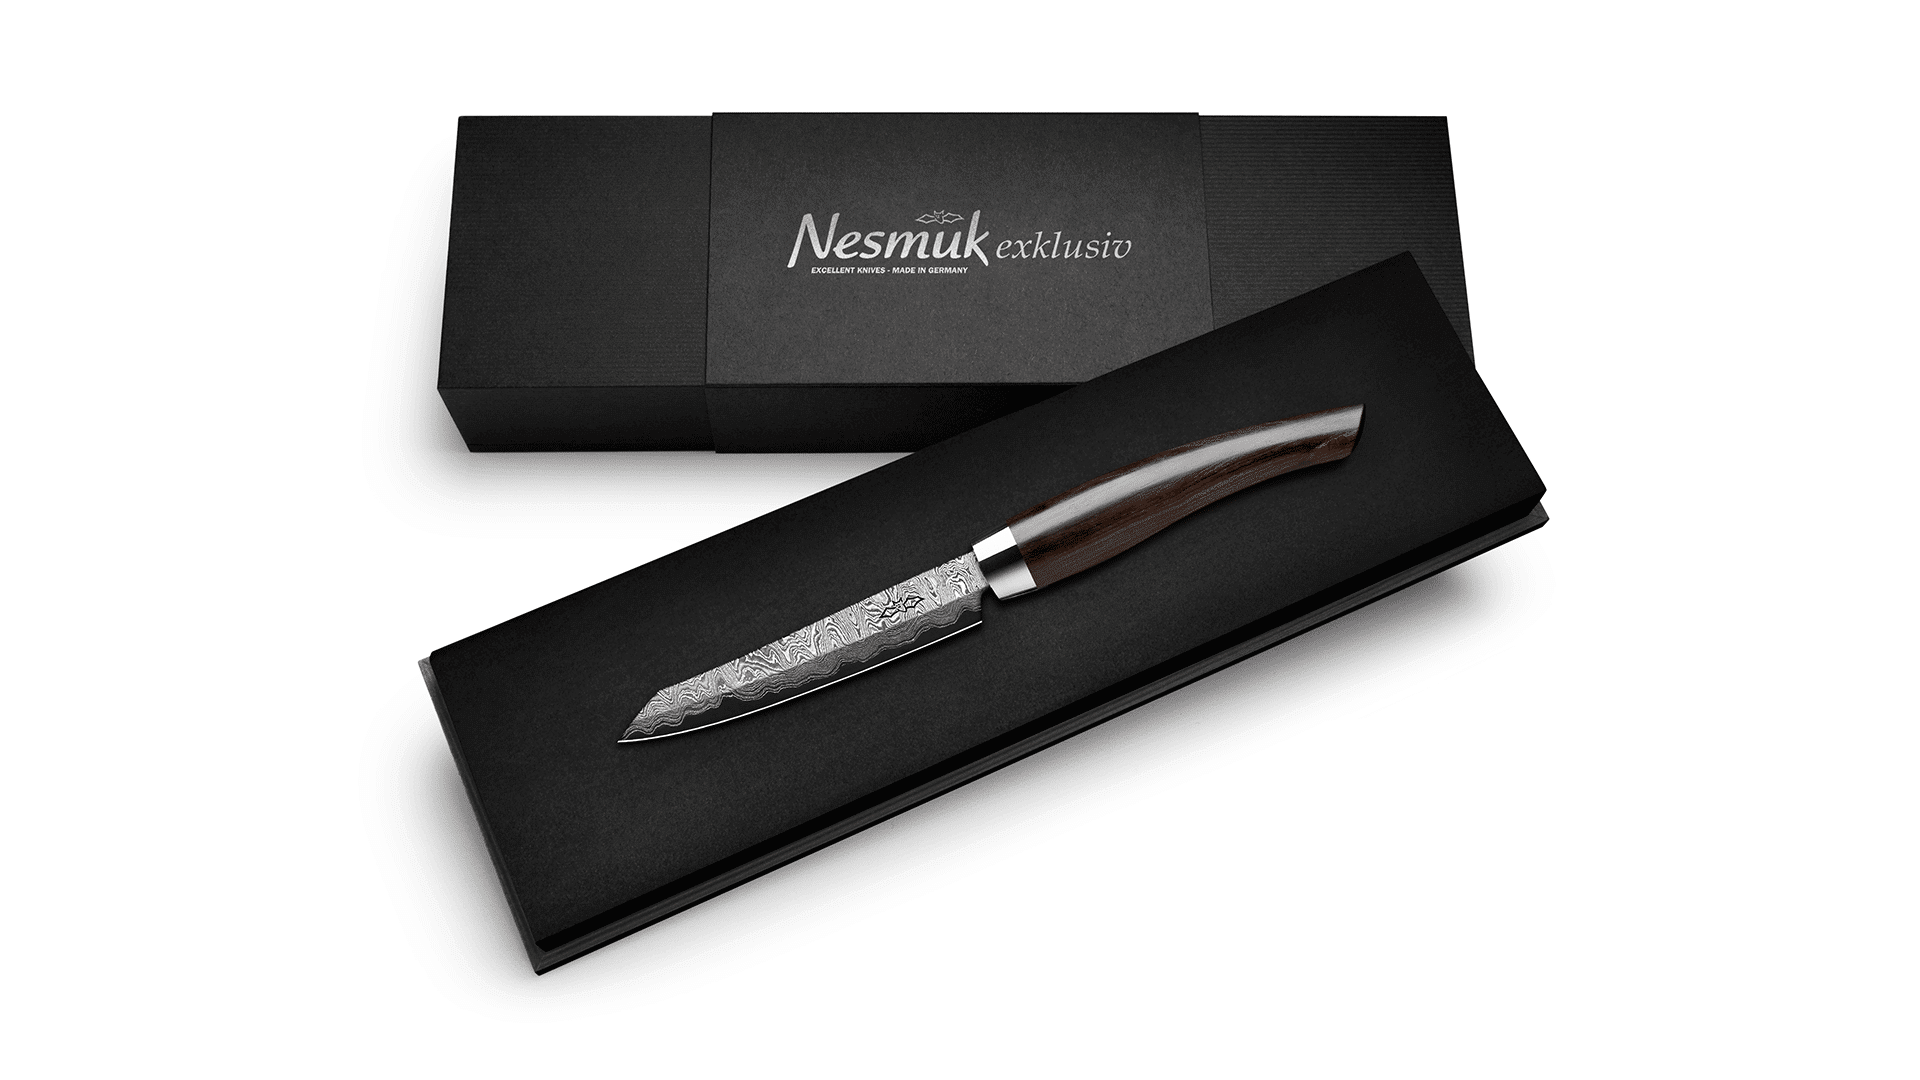 nesmuk-exclusive-c150-office-knife-grenadilla-wood-from-solingen-noble-packaging